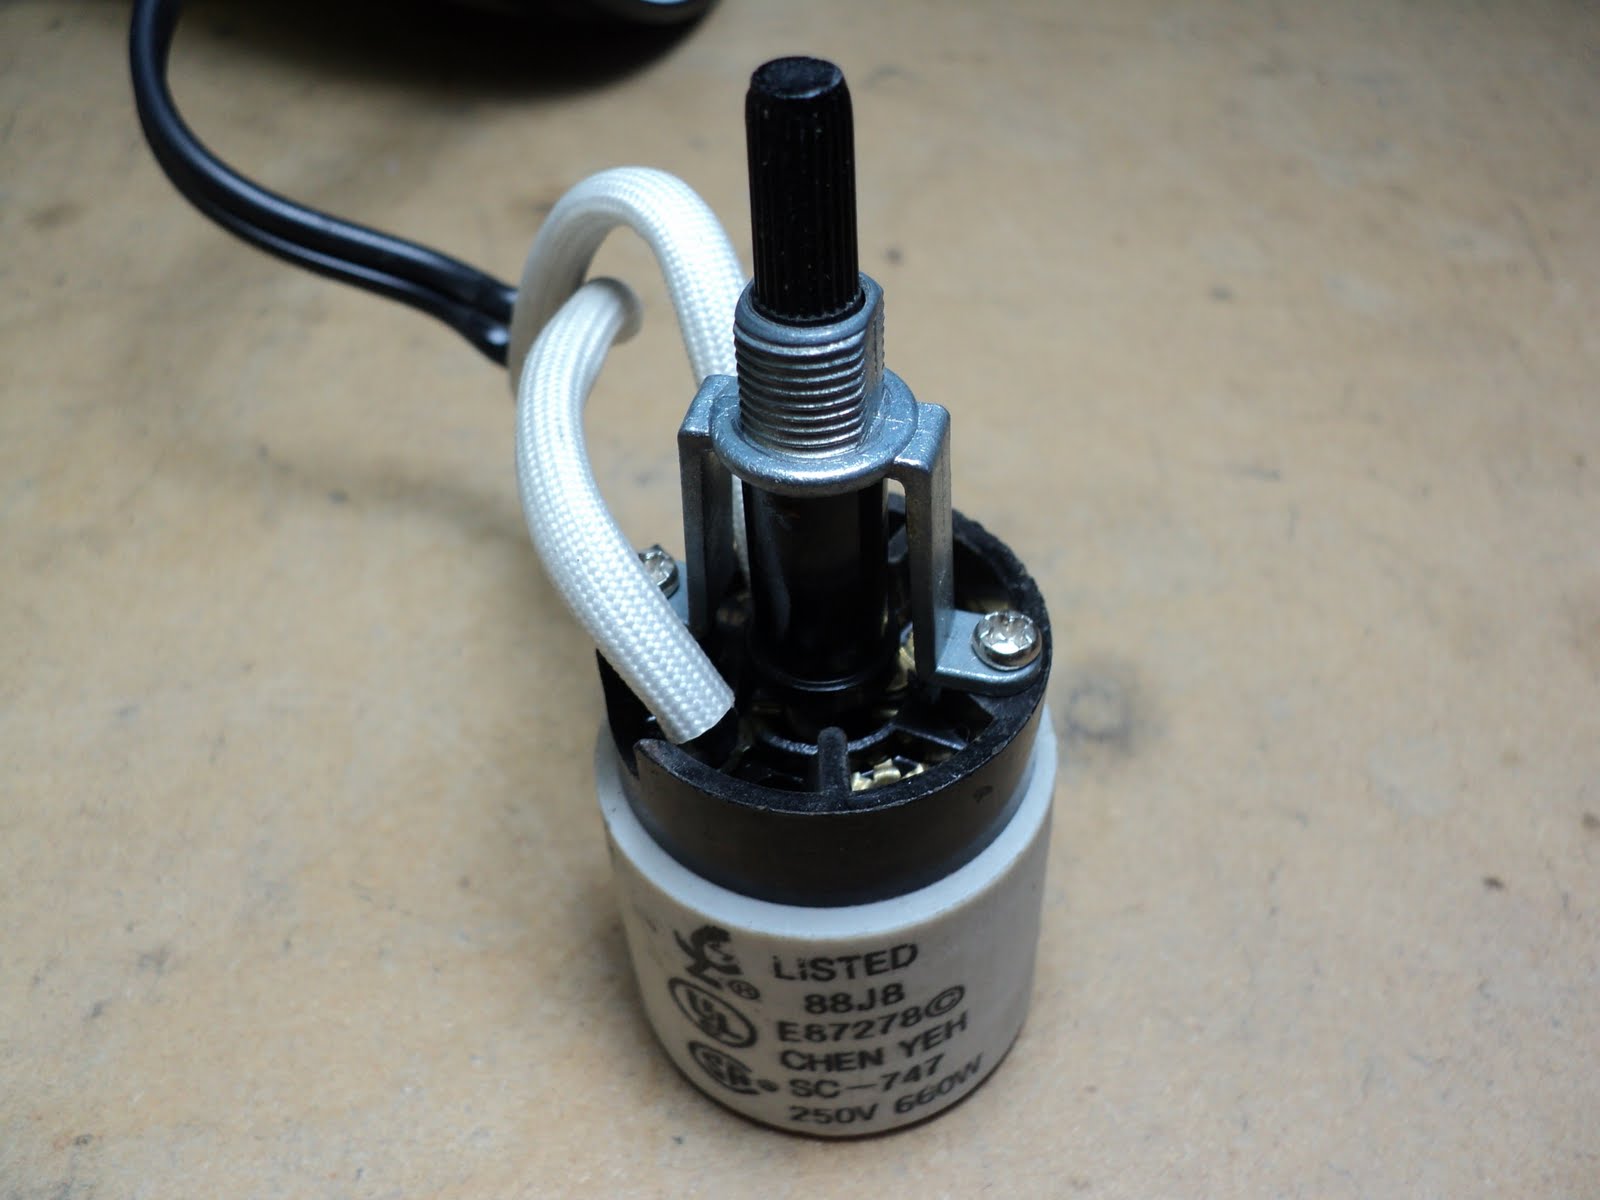 A Rotary Switch Repair, How To Fix A Lamp Rotary Switch